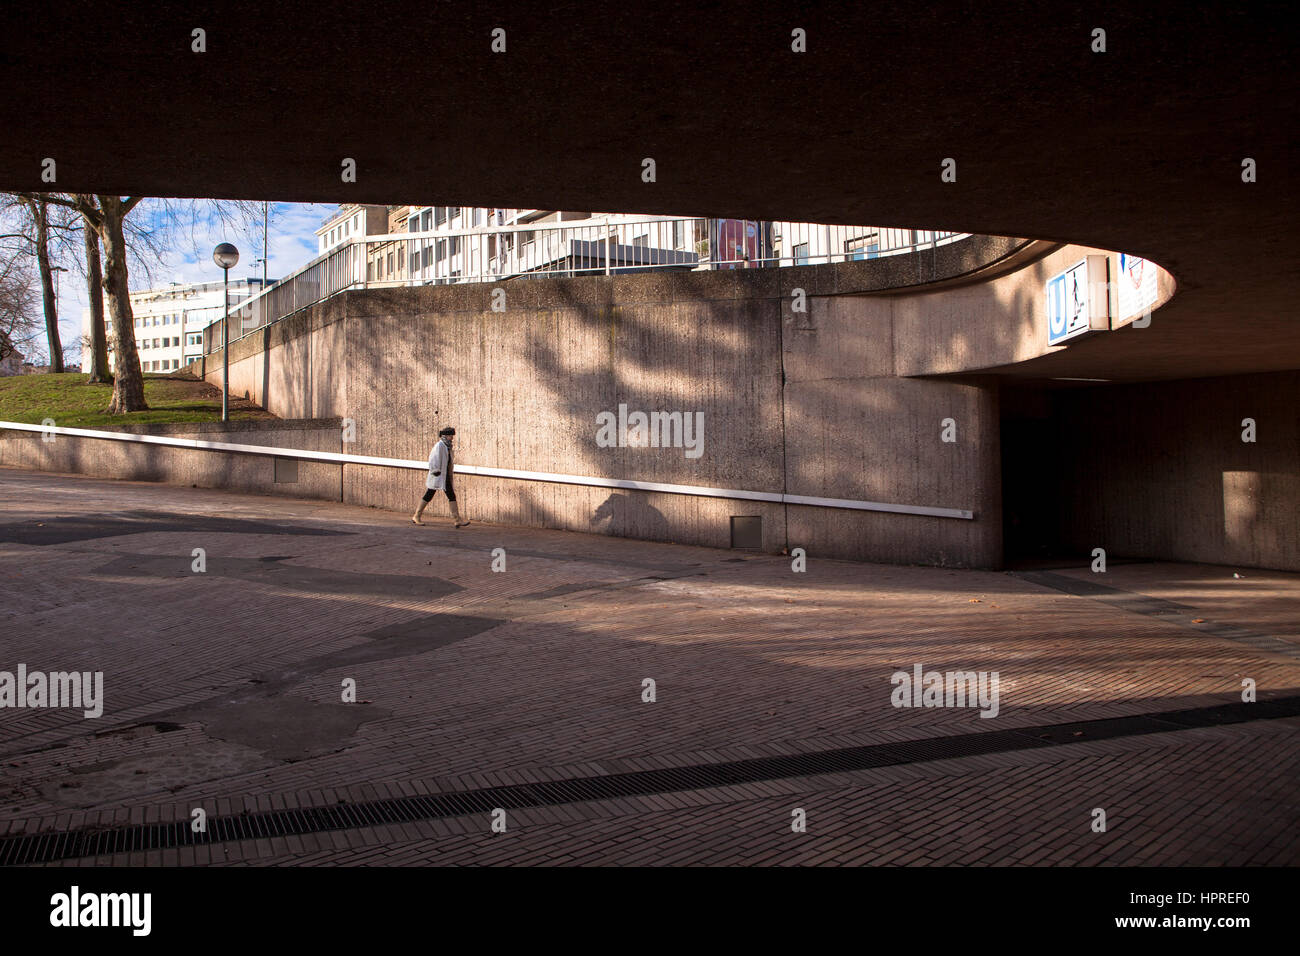 Europe, Germany, North Rhine-Westphalia, Cologne, pedestrian underpass at the Ebert square. Stock Photo